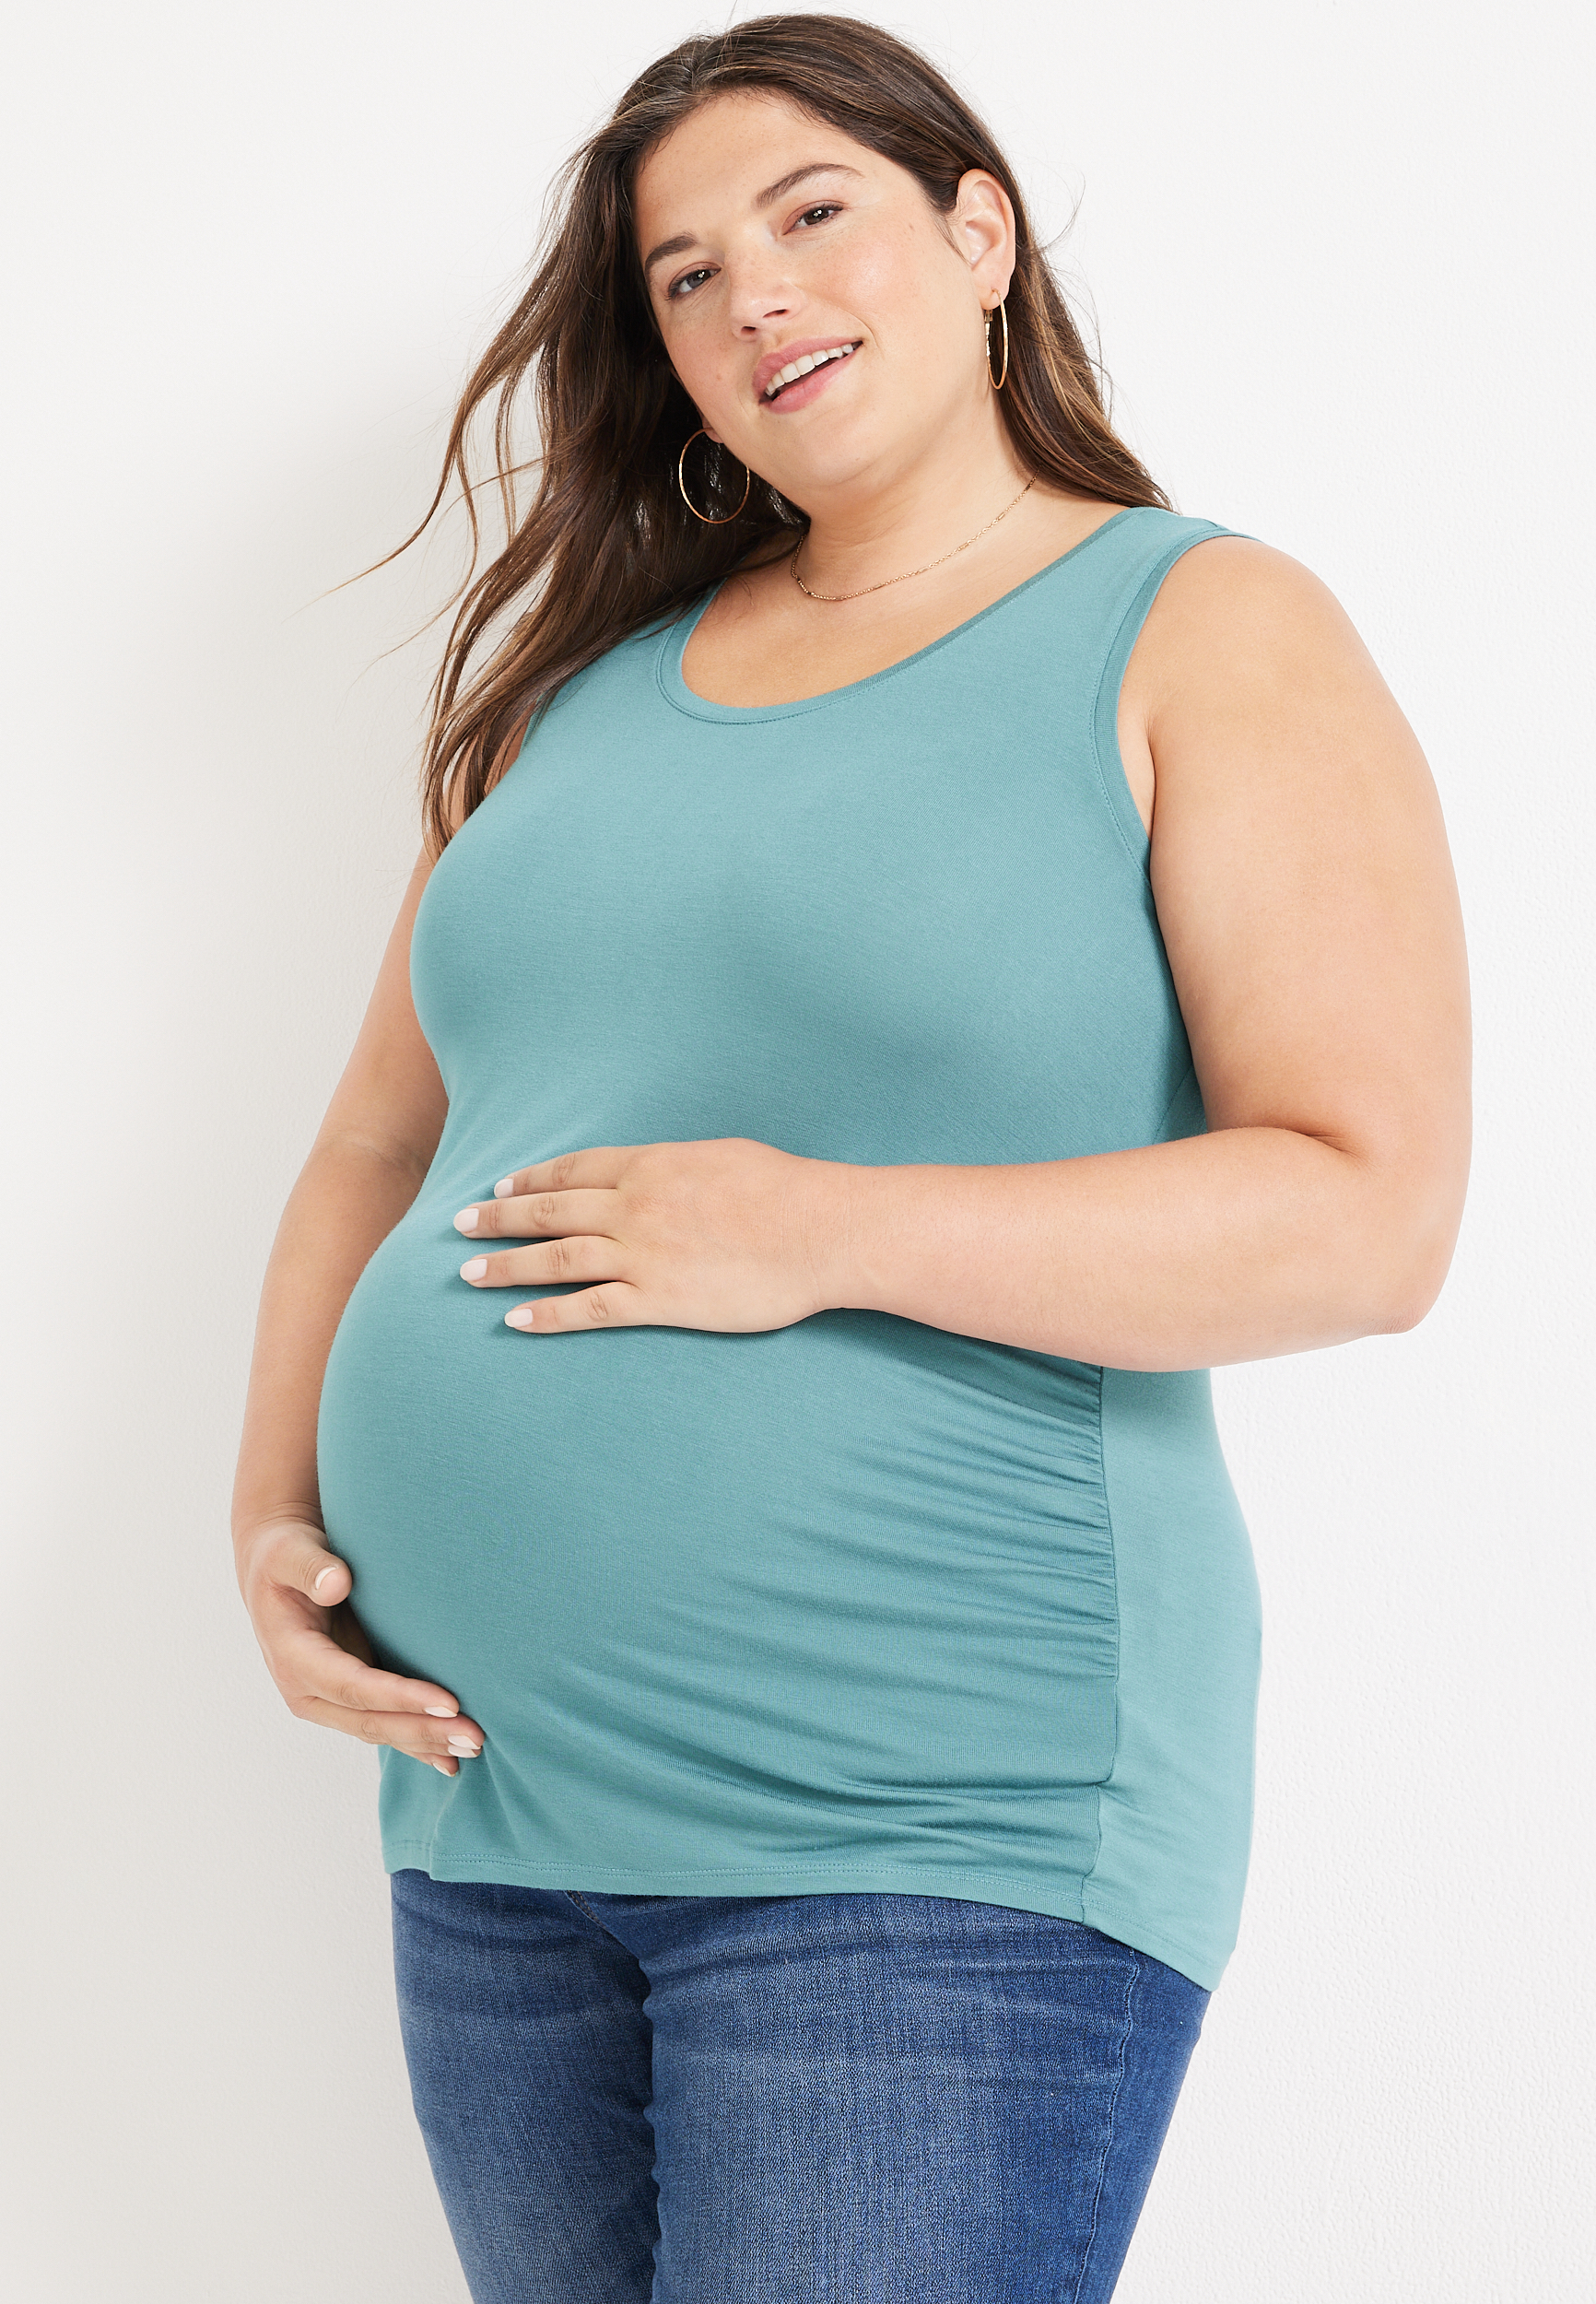 Size Maternity Clothes | Pregnancy Clothing | maurices